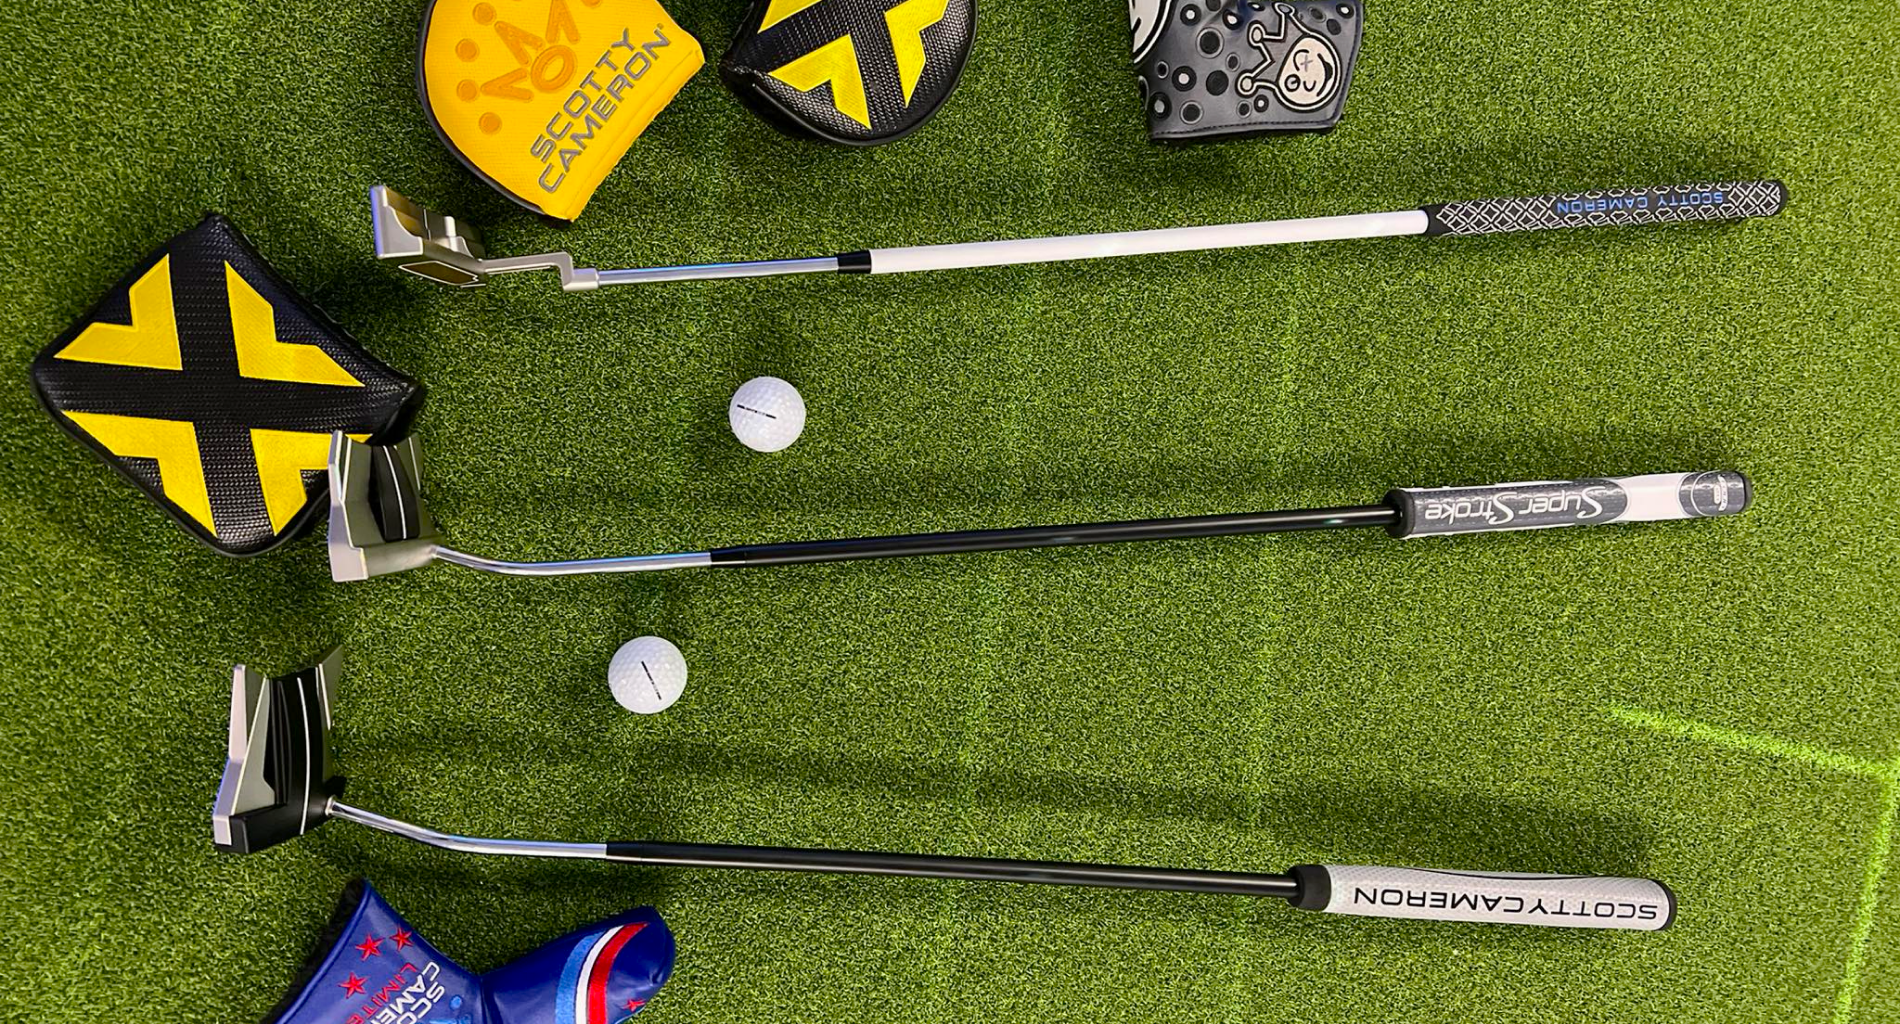 Golf Shaft Types: How To Choose The Right One? - golf shafts warehouse